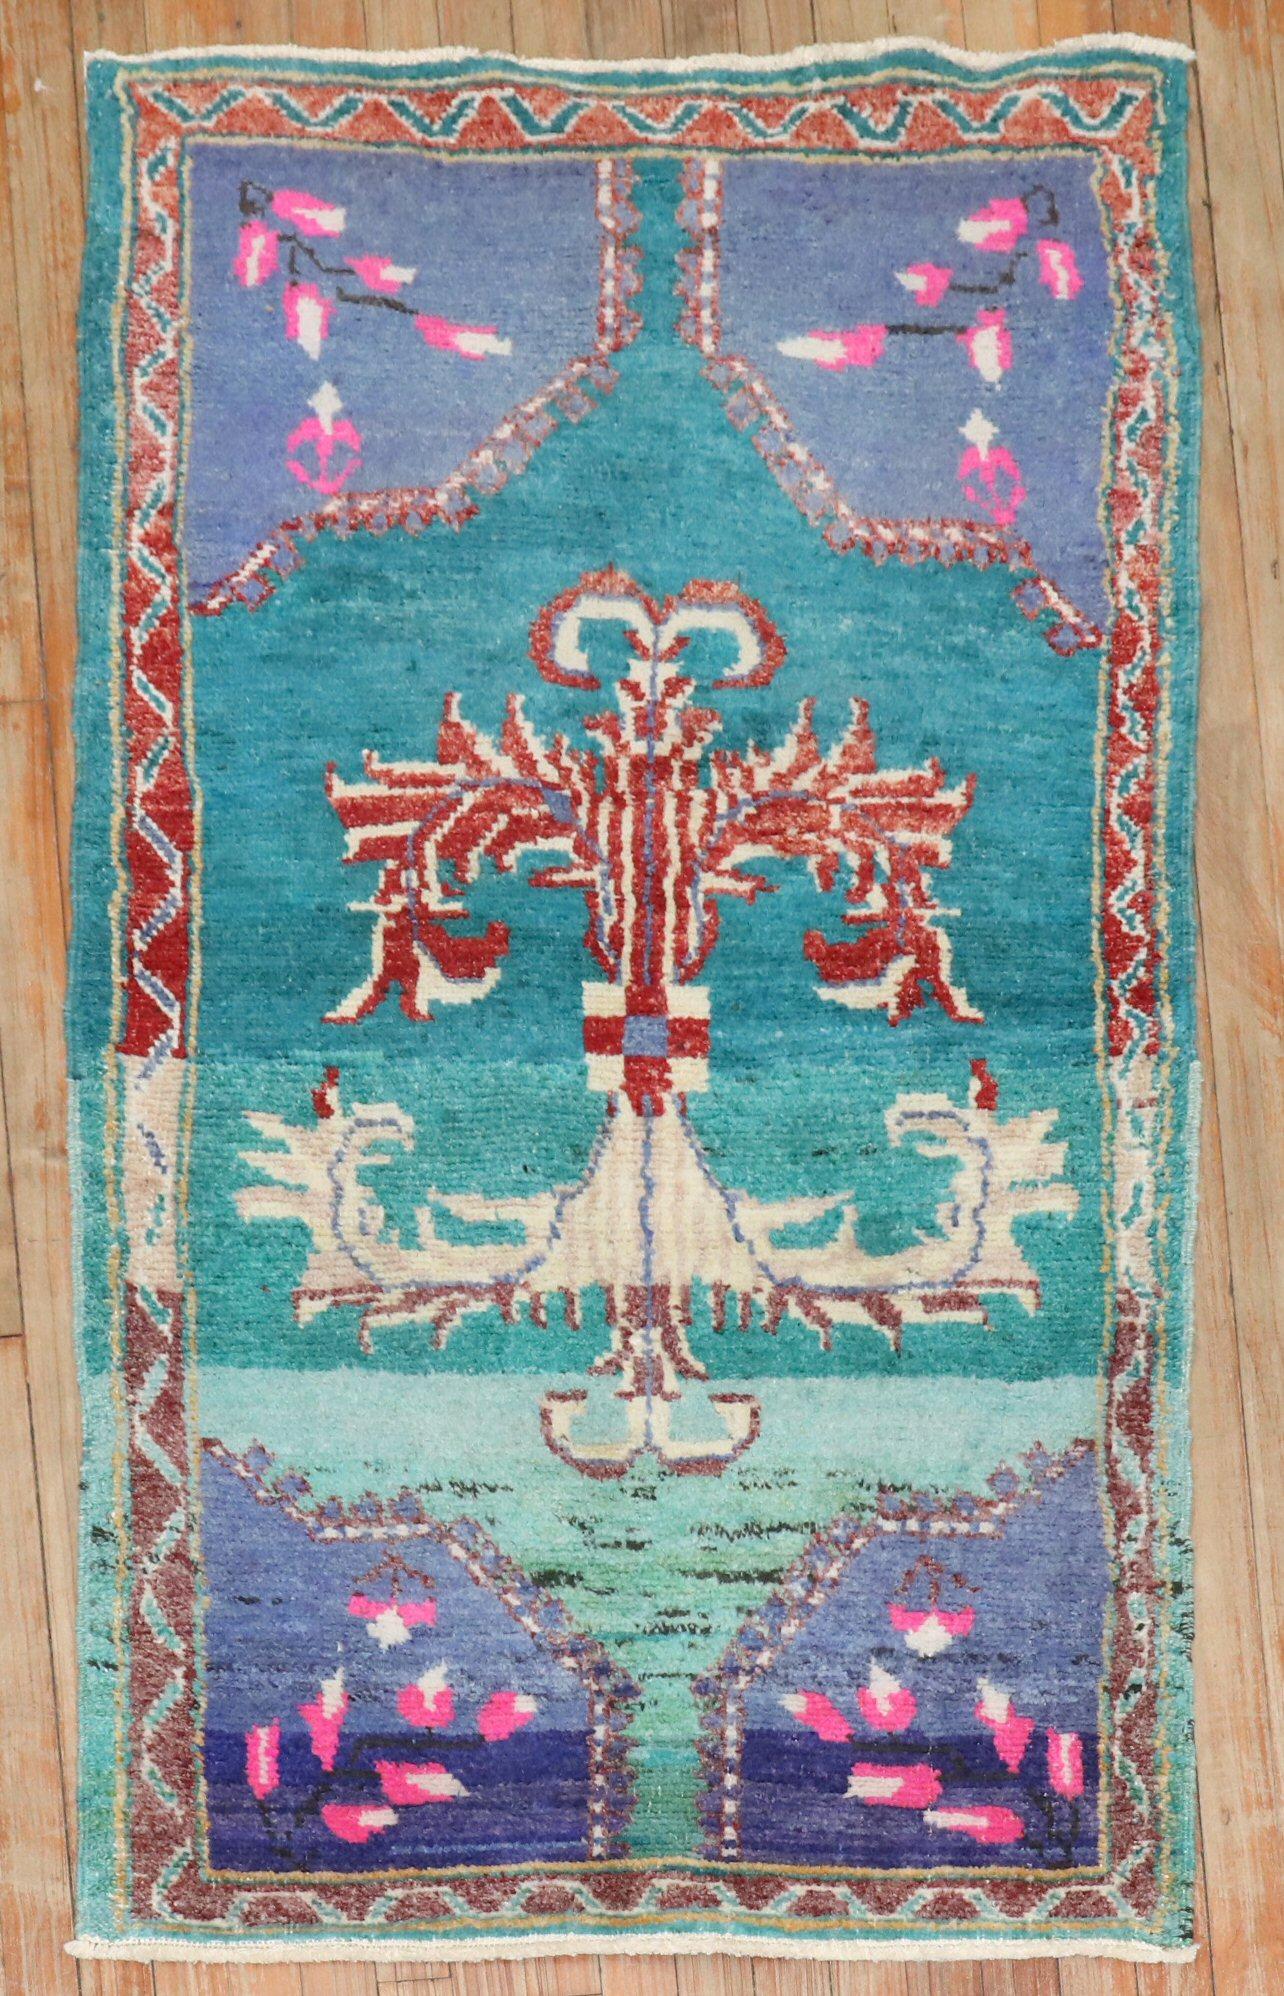 mid 20th century scatter size turkish anatolian rug

Details
rug no.	j3762
2'10'' x 4'8''

